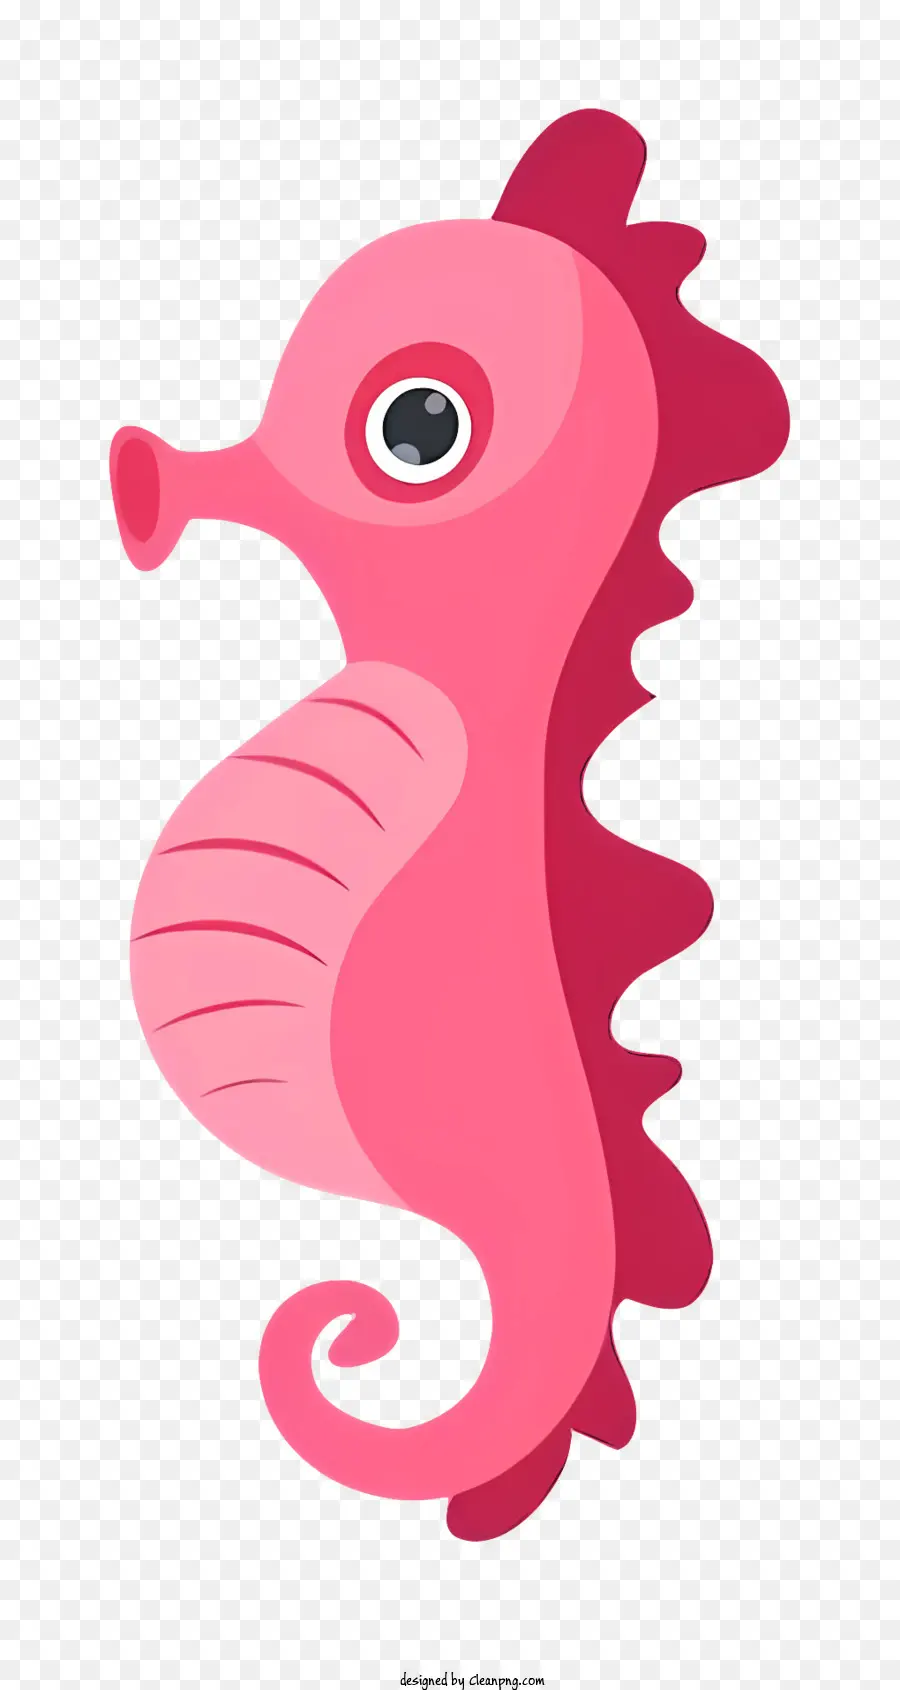 icon pink sea horse large eyes long tail small mouth